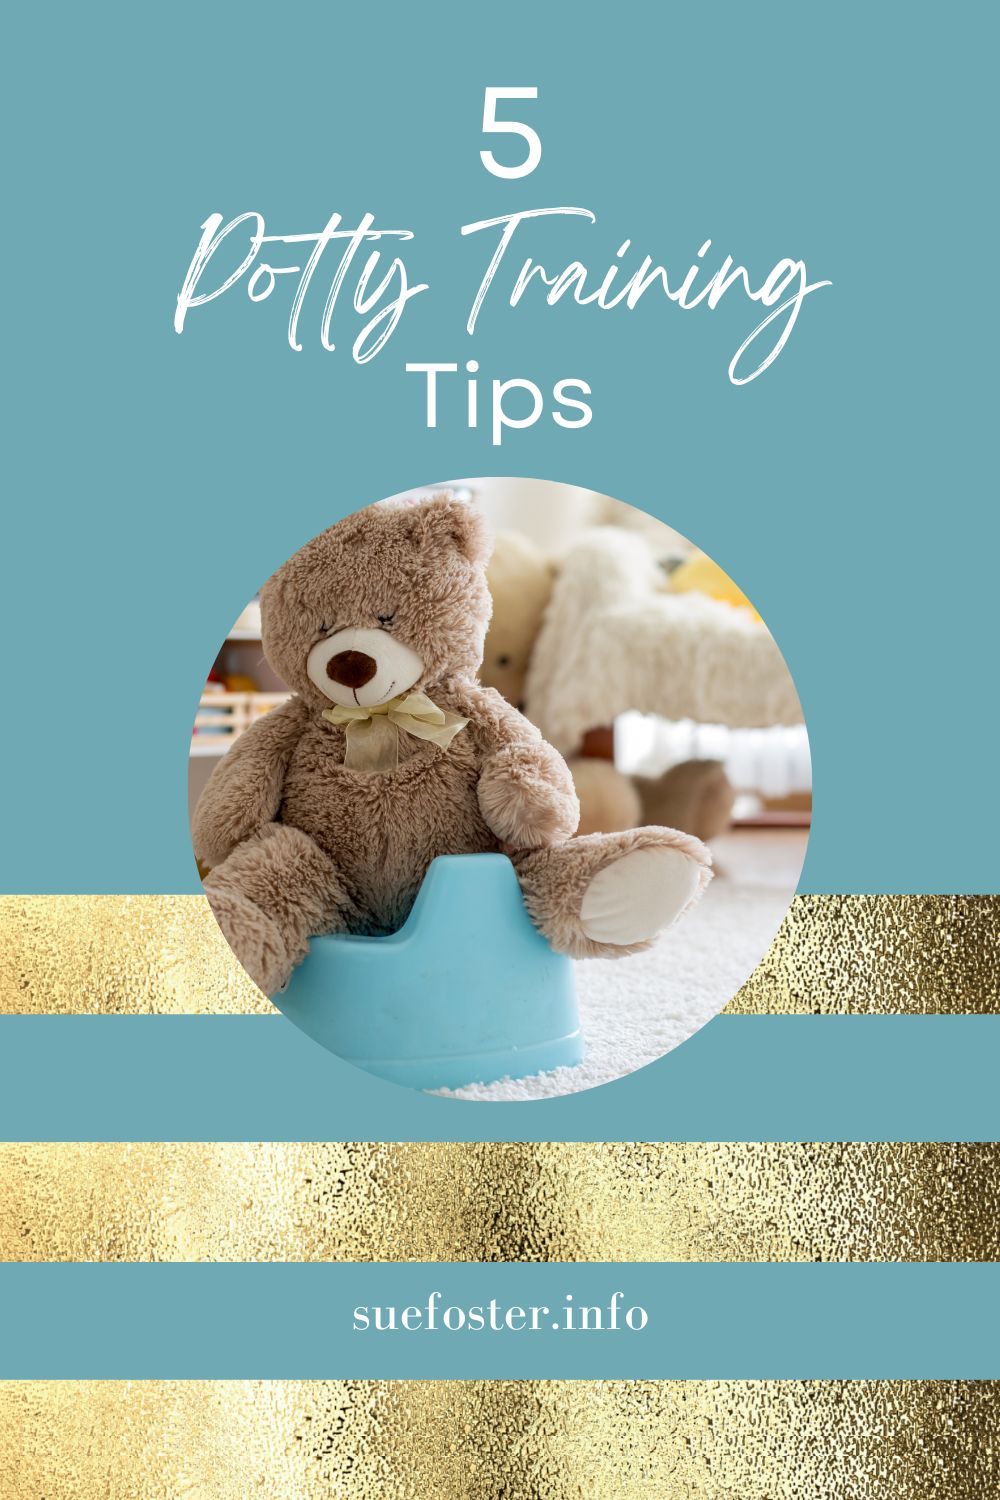 Potty training can be an extremely draining experience for parents. Even when a child begins to show signs they are ready to be trained, it can still take quite a bit of patience and dedication. Fortunately, there are ways to make the process less daunting!